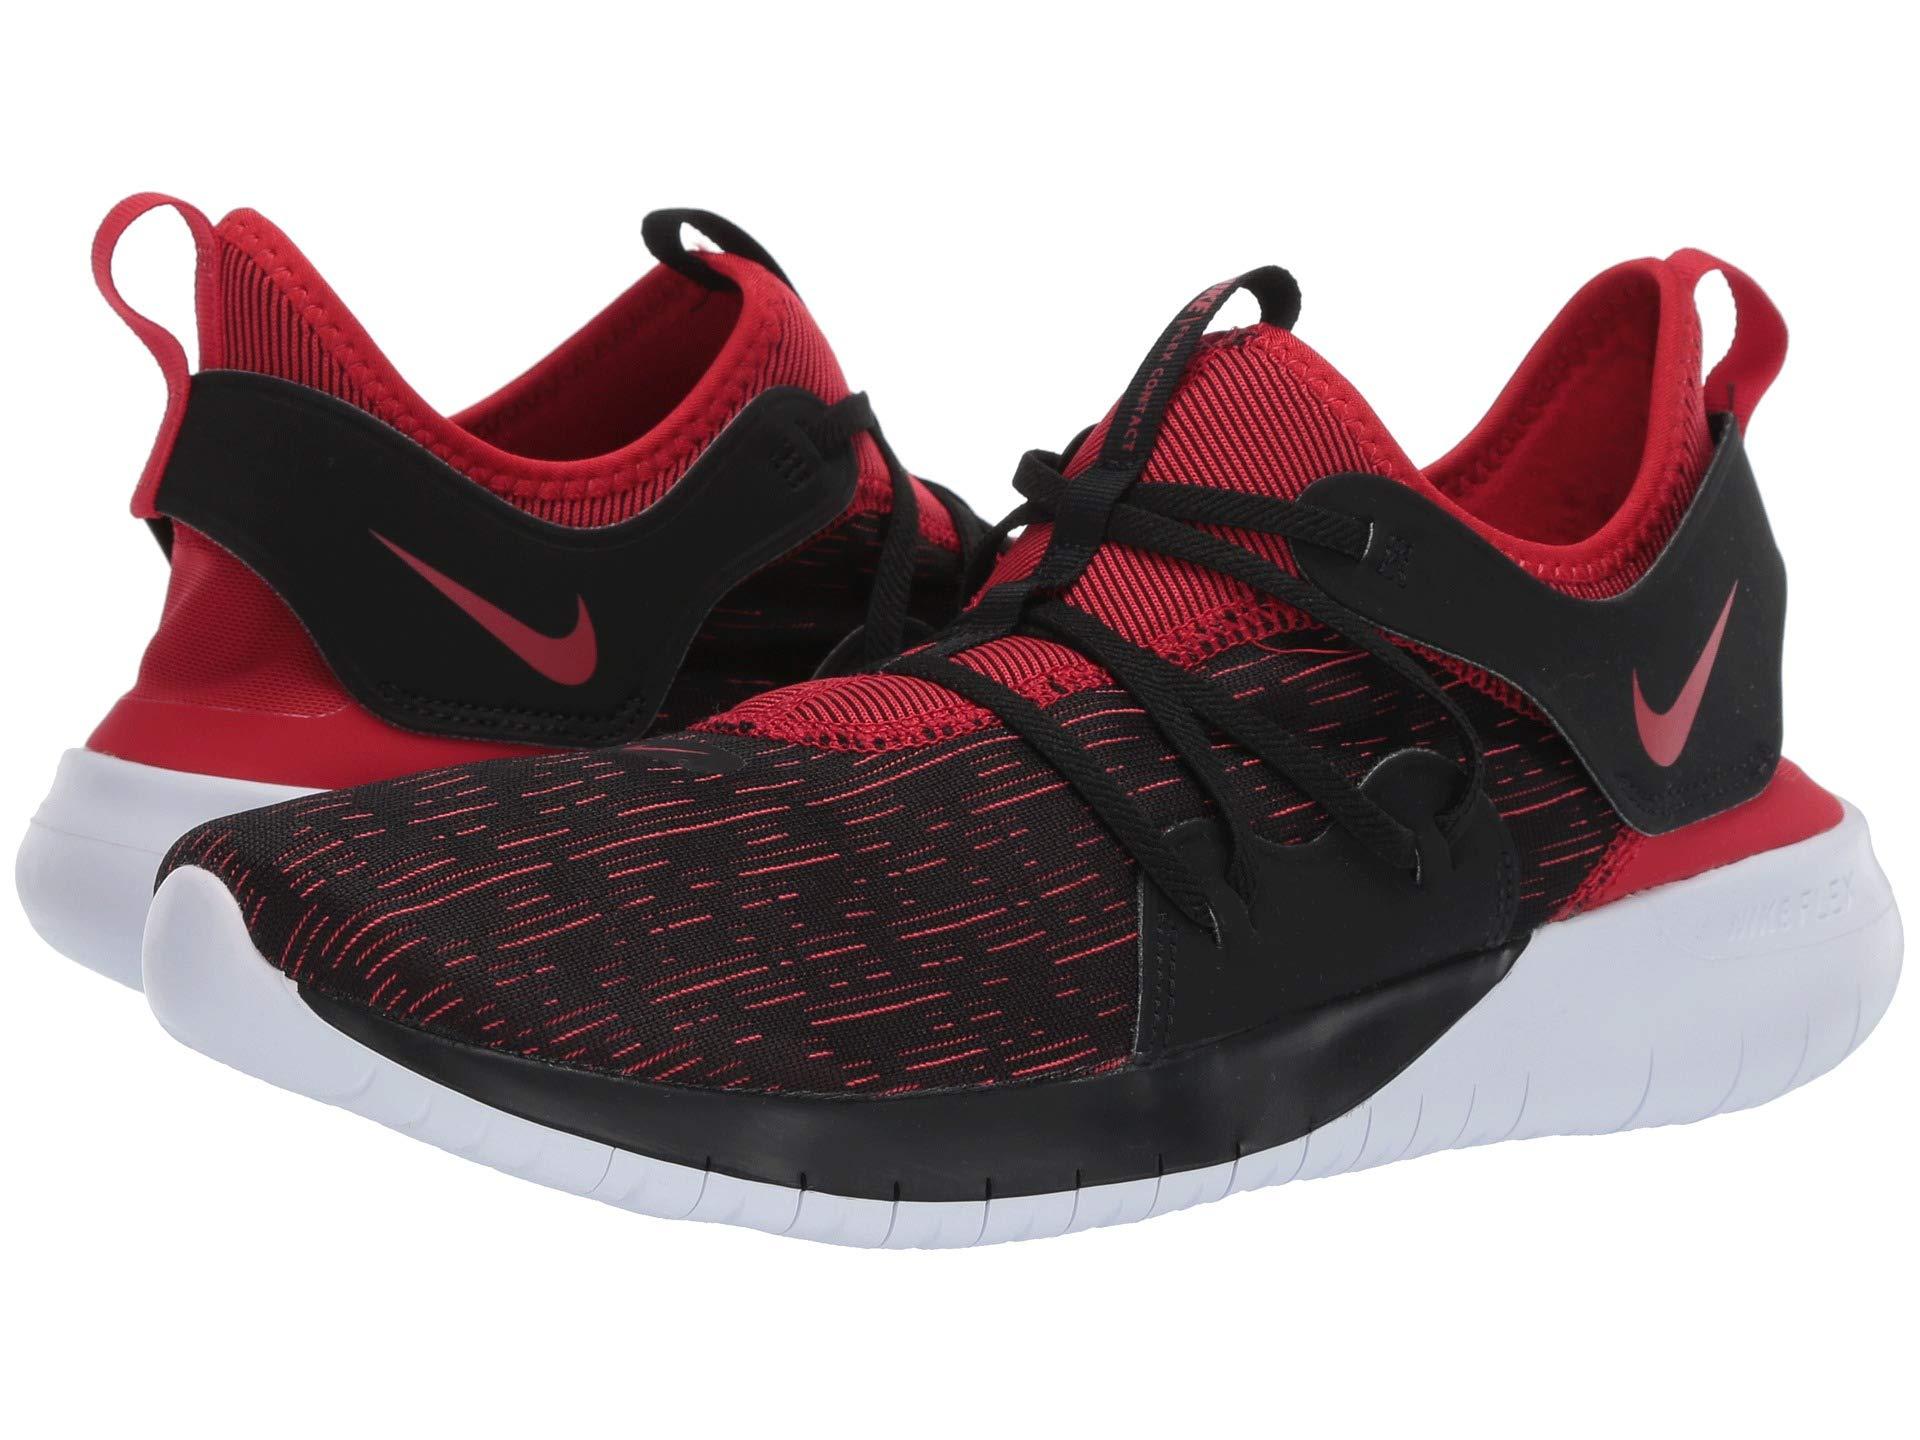 nike flex red and black